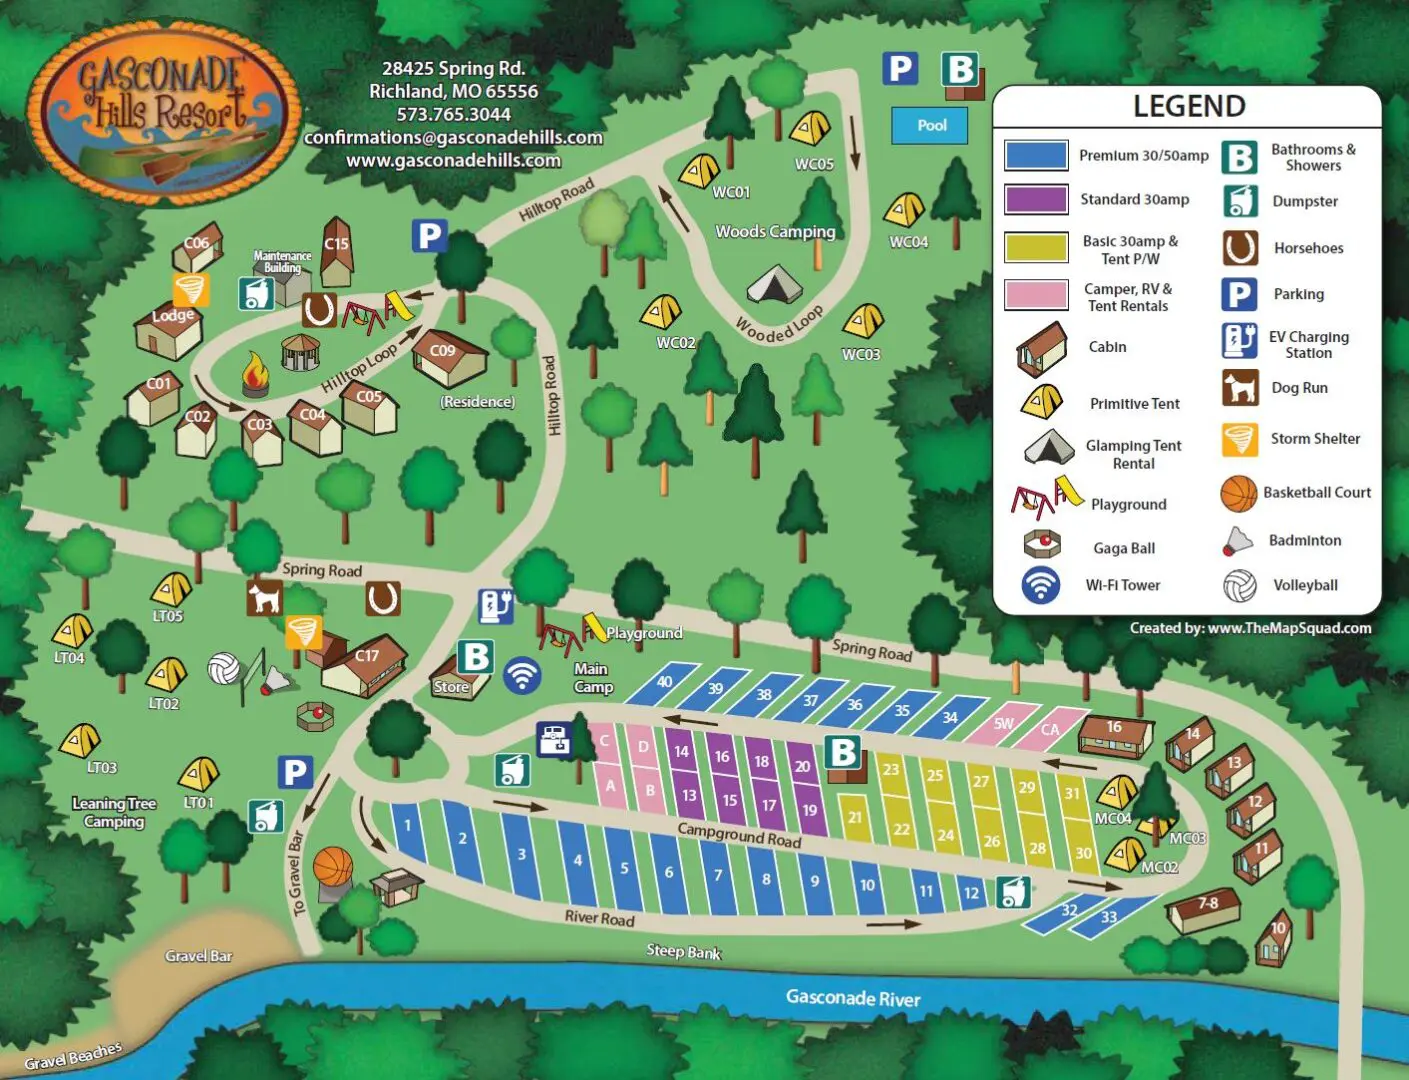 Colorful illustrated map of gasconade hills resort showing cabins, campsites, facilities, and a river, with a legend for easy reference.